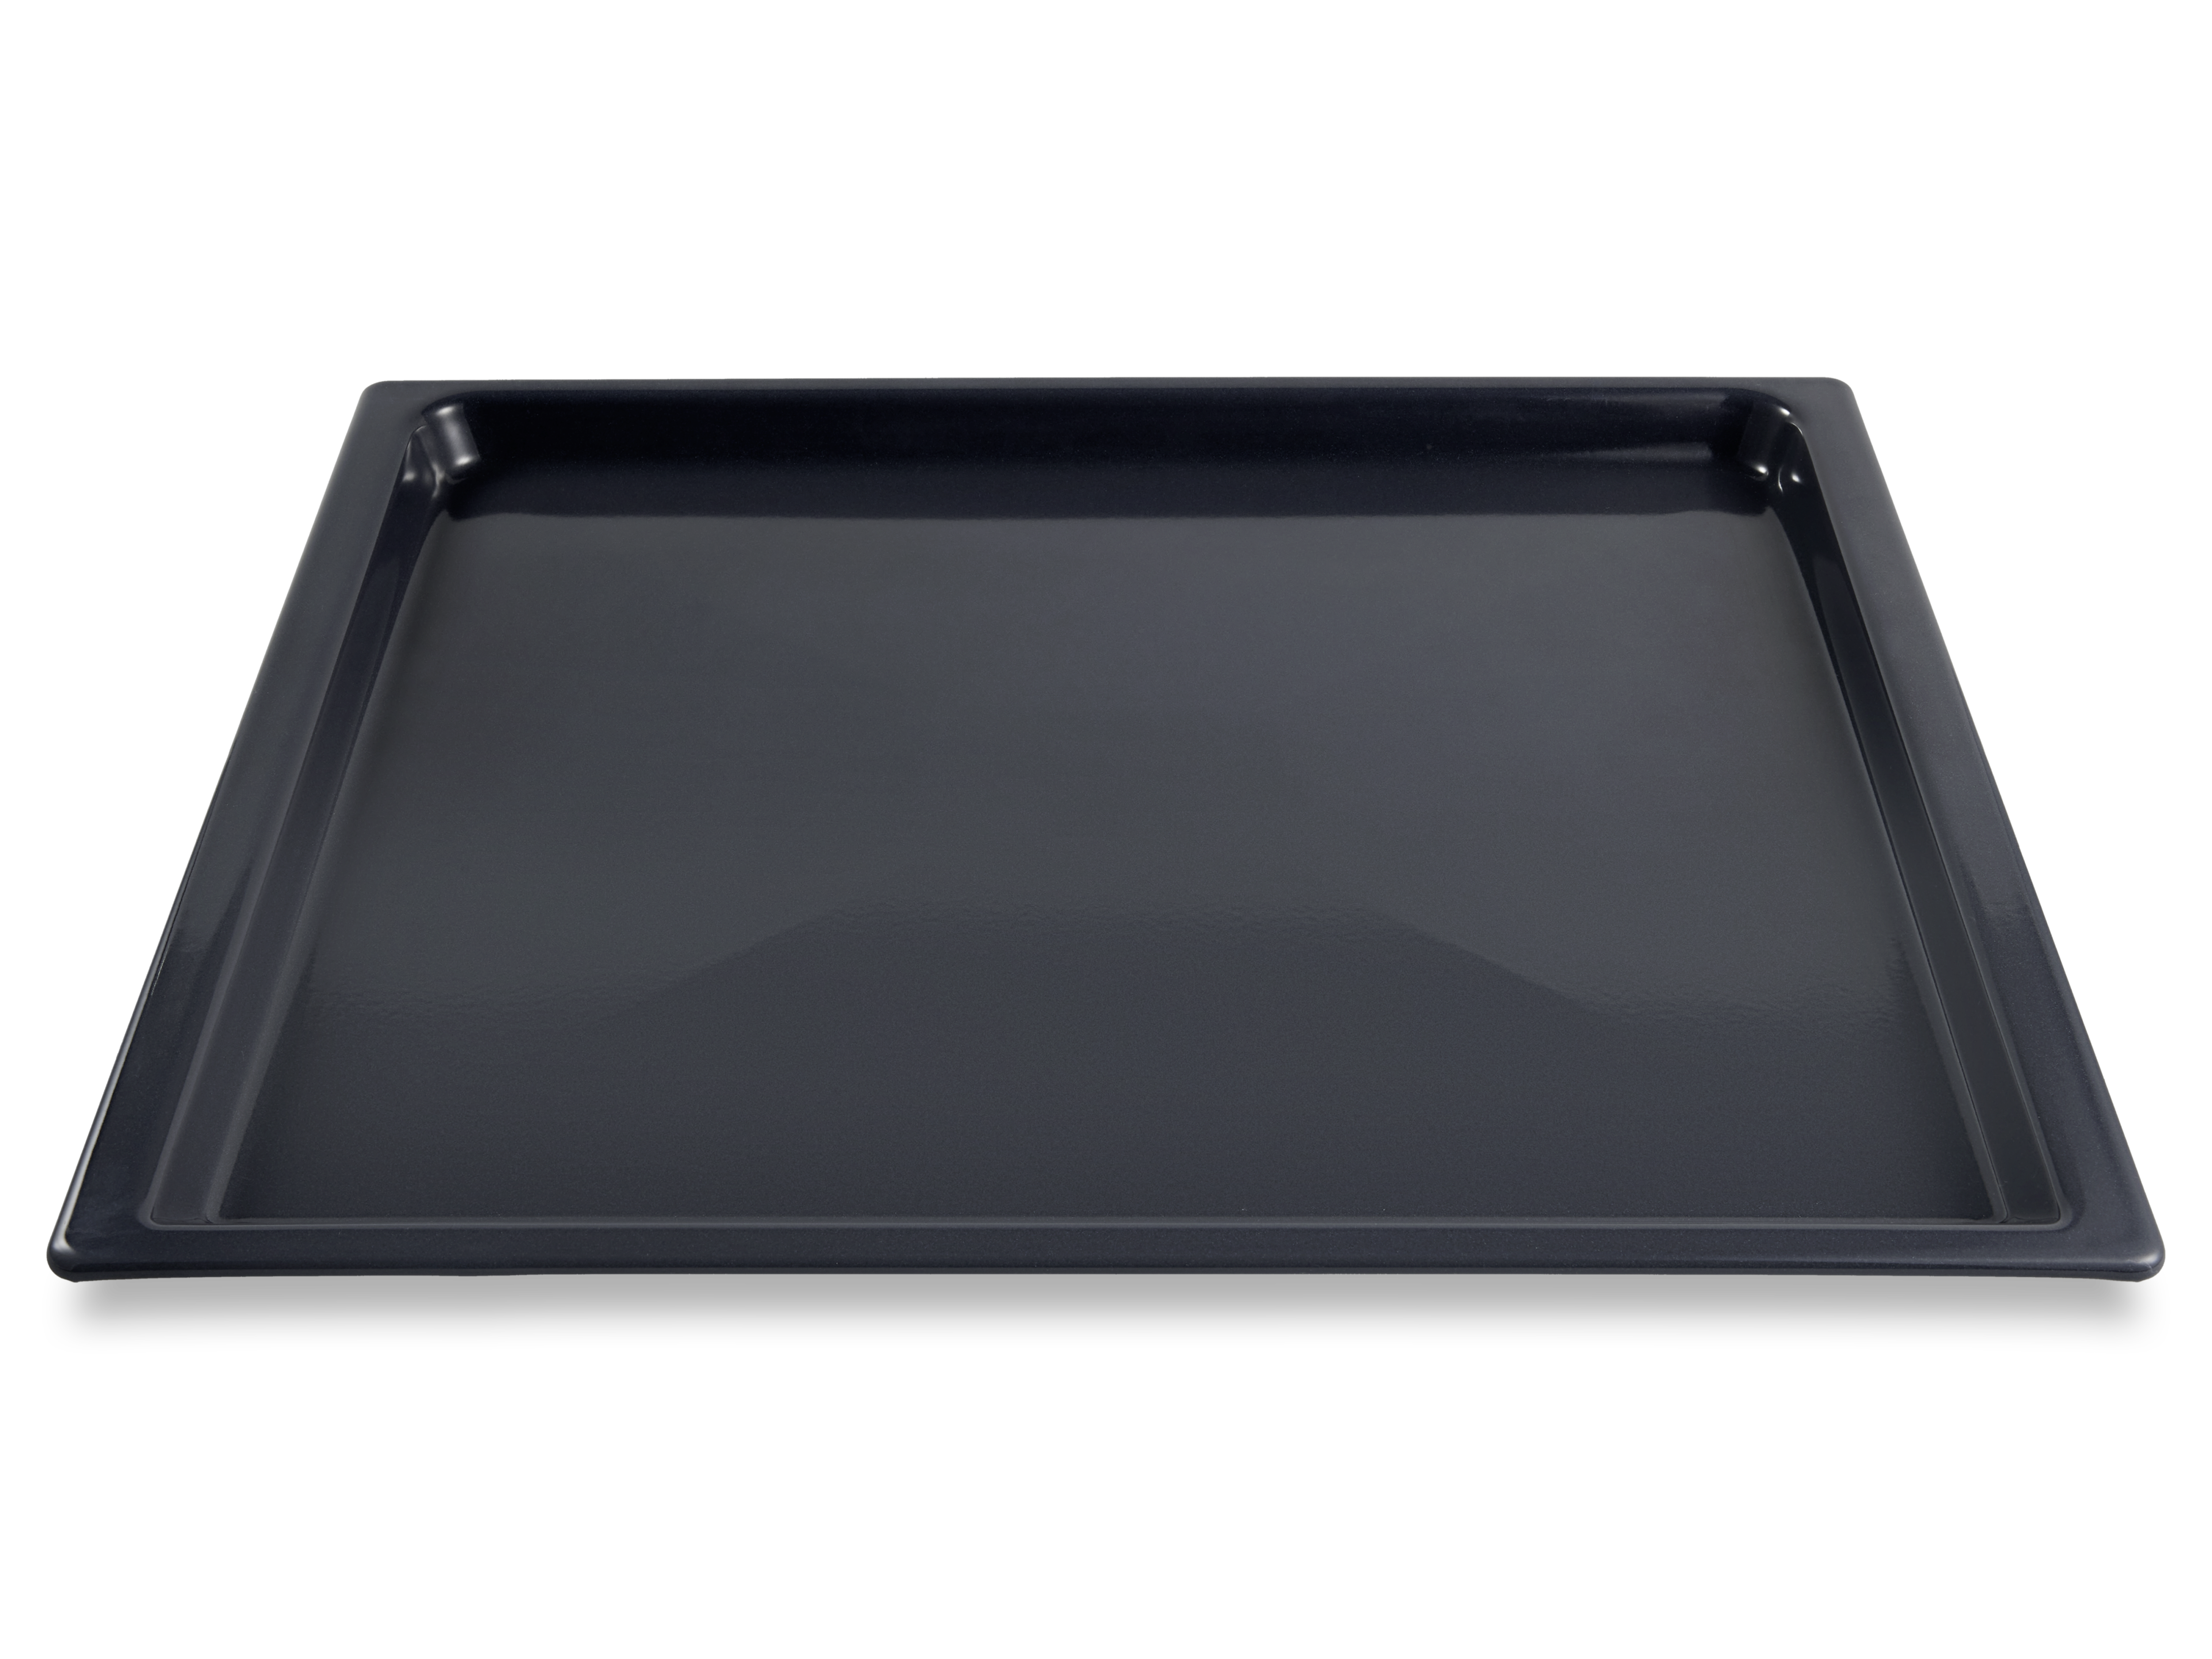 HBB 71Genuine Miele baking tray with PerfectClean finish.